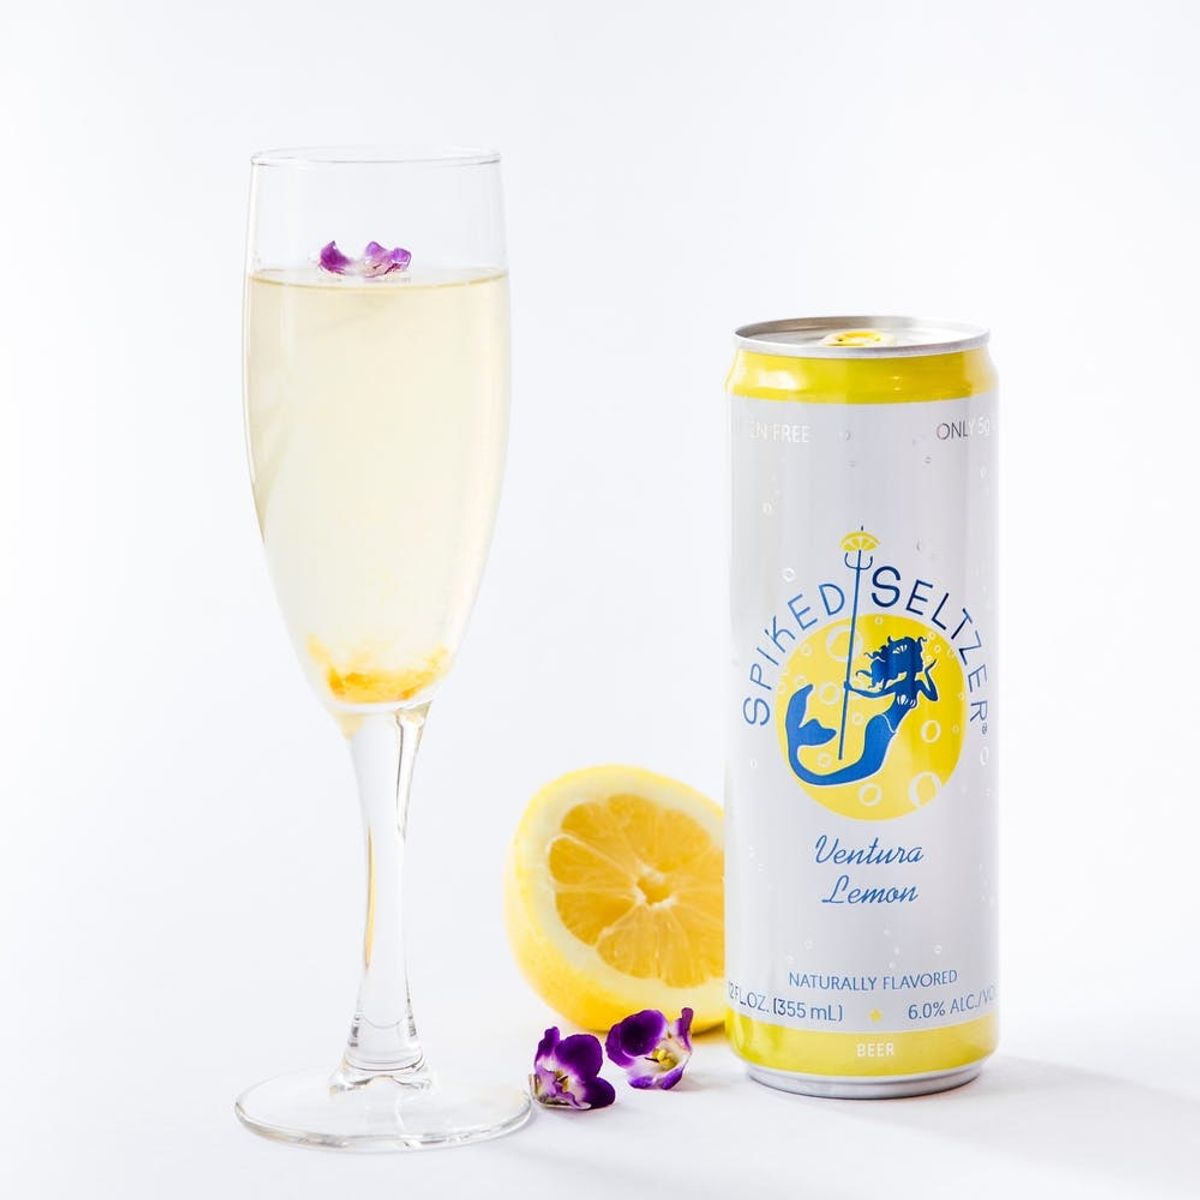 Clink to the Royal Wedding With a SpikedSeltzer Cocktail Inspired by the Official Cake